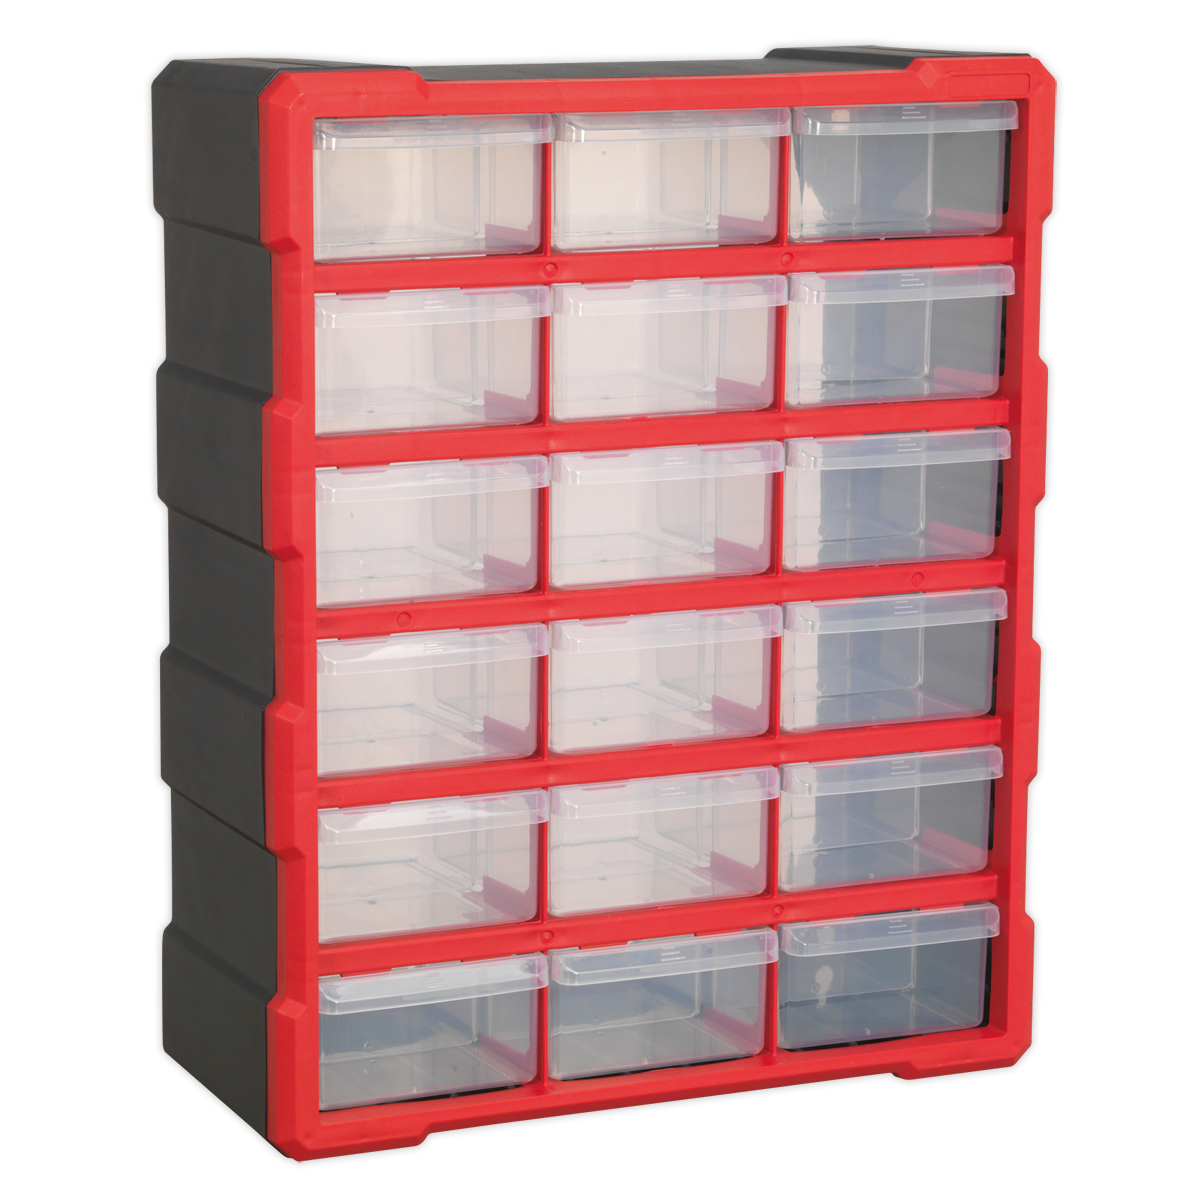 SEALEY - APDC18R Cabinet Box 18 Drawer - Red/Black